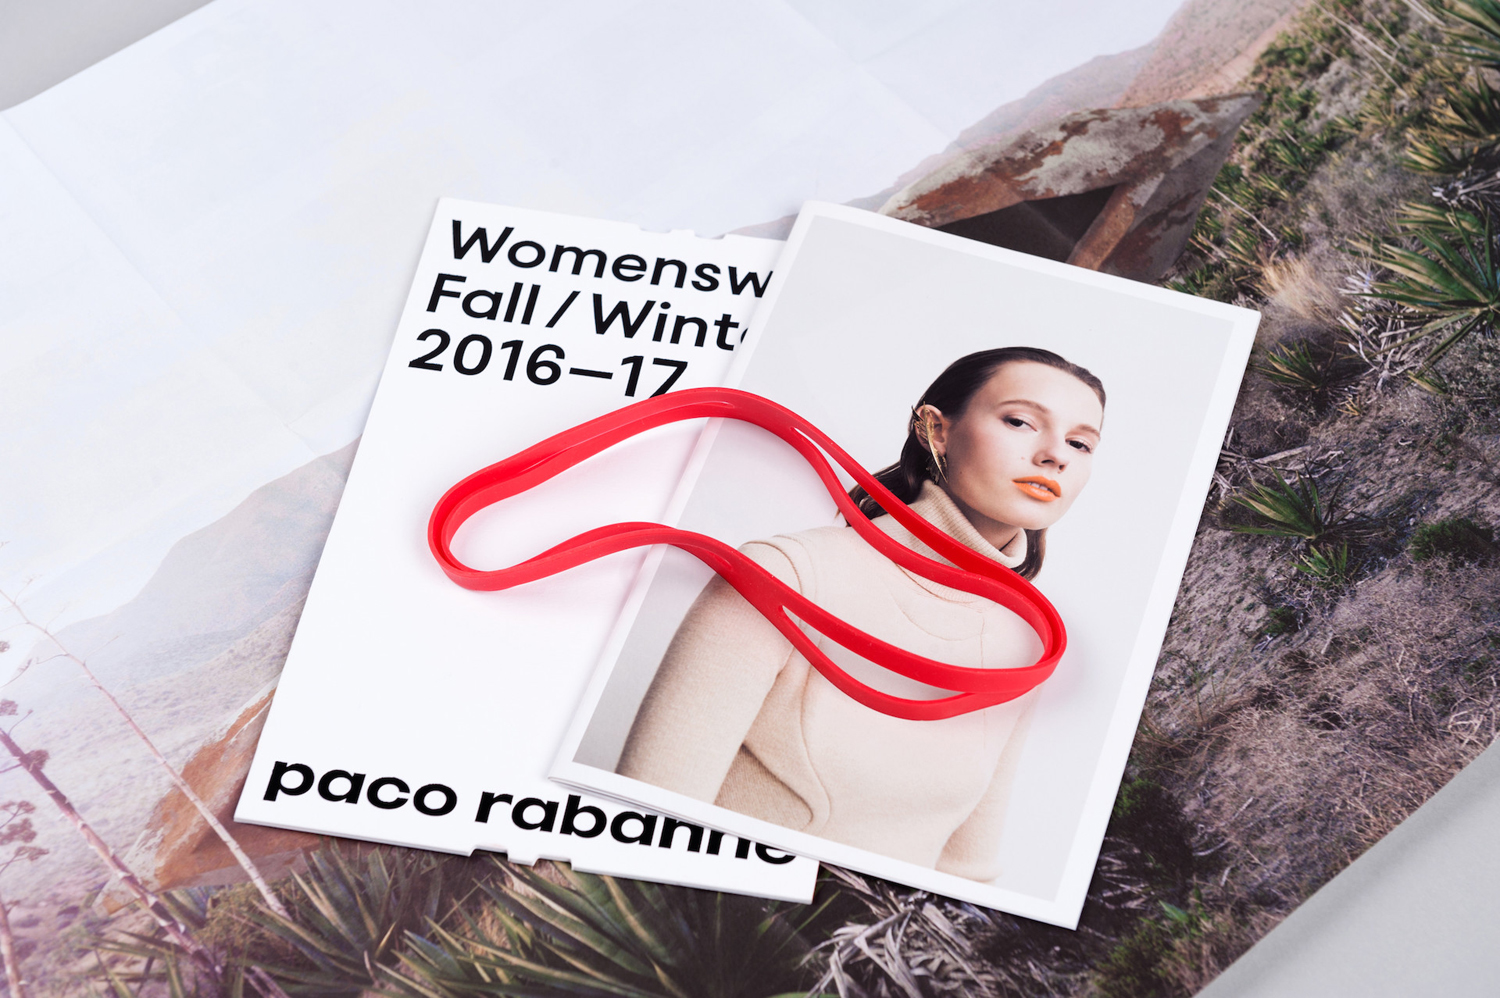 Brand identity and Fall / Winter 2016-17 invitation and lookbook for French fashion label Paco Rabanne by Zak Group, United Kingdom